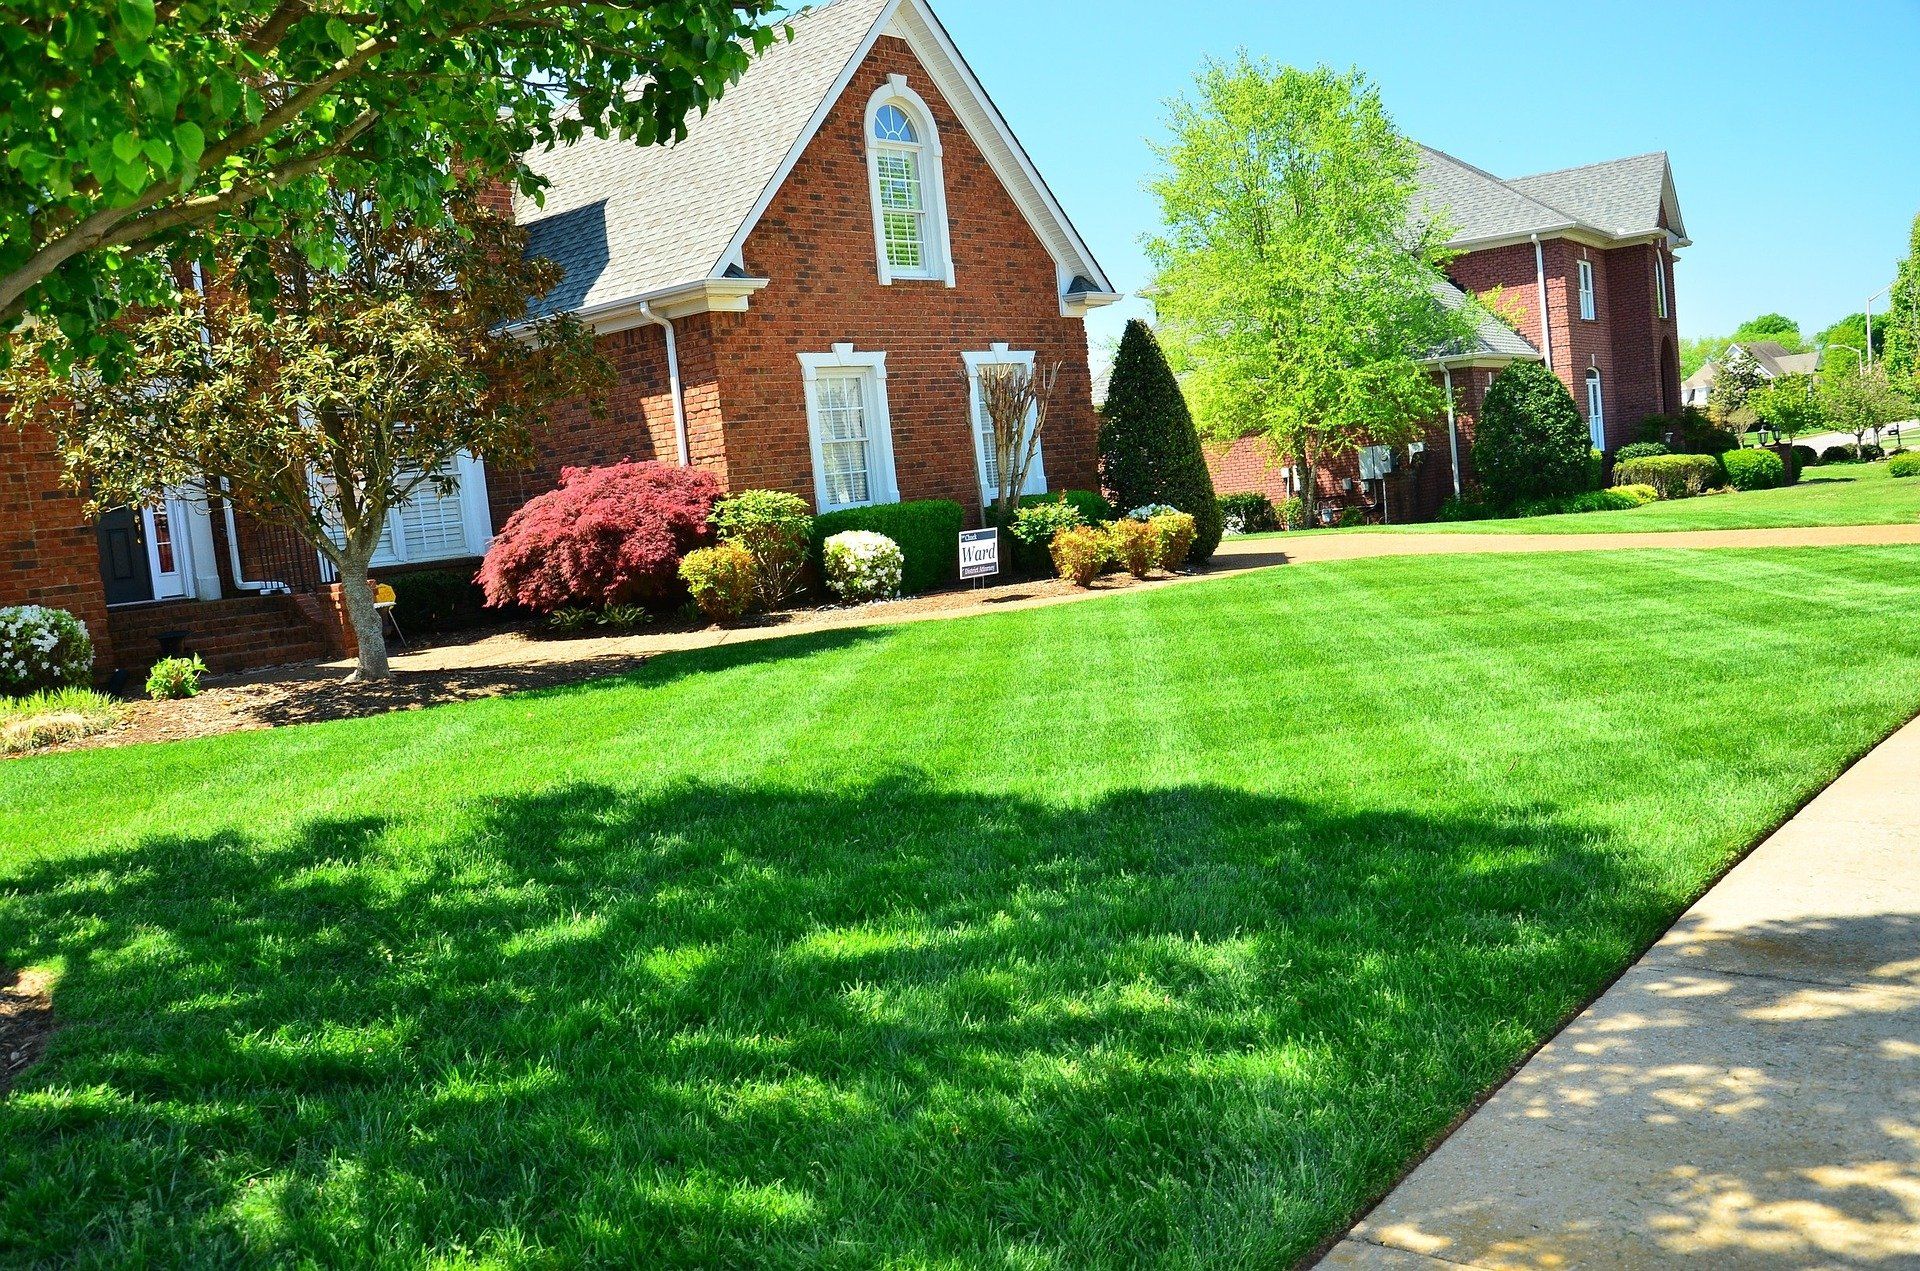 Suburban home with large front lawn